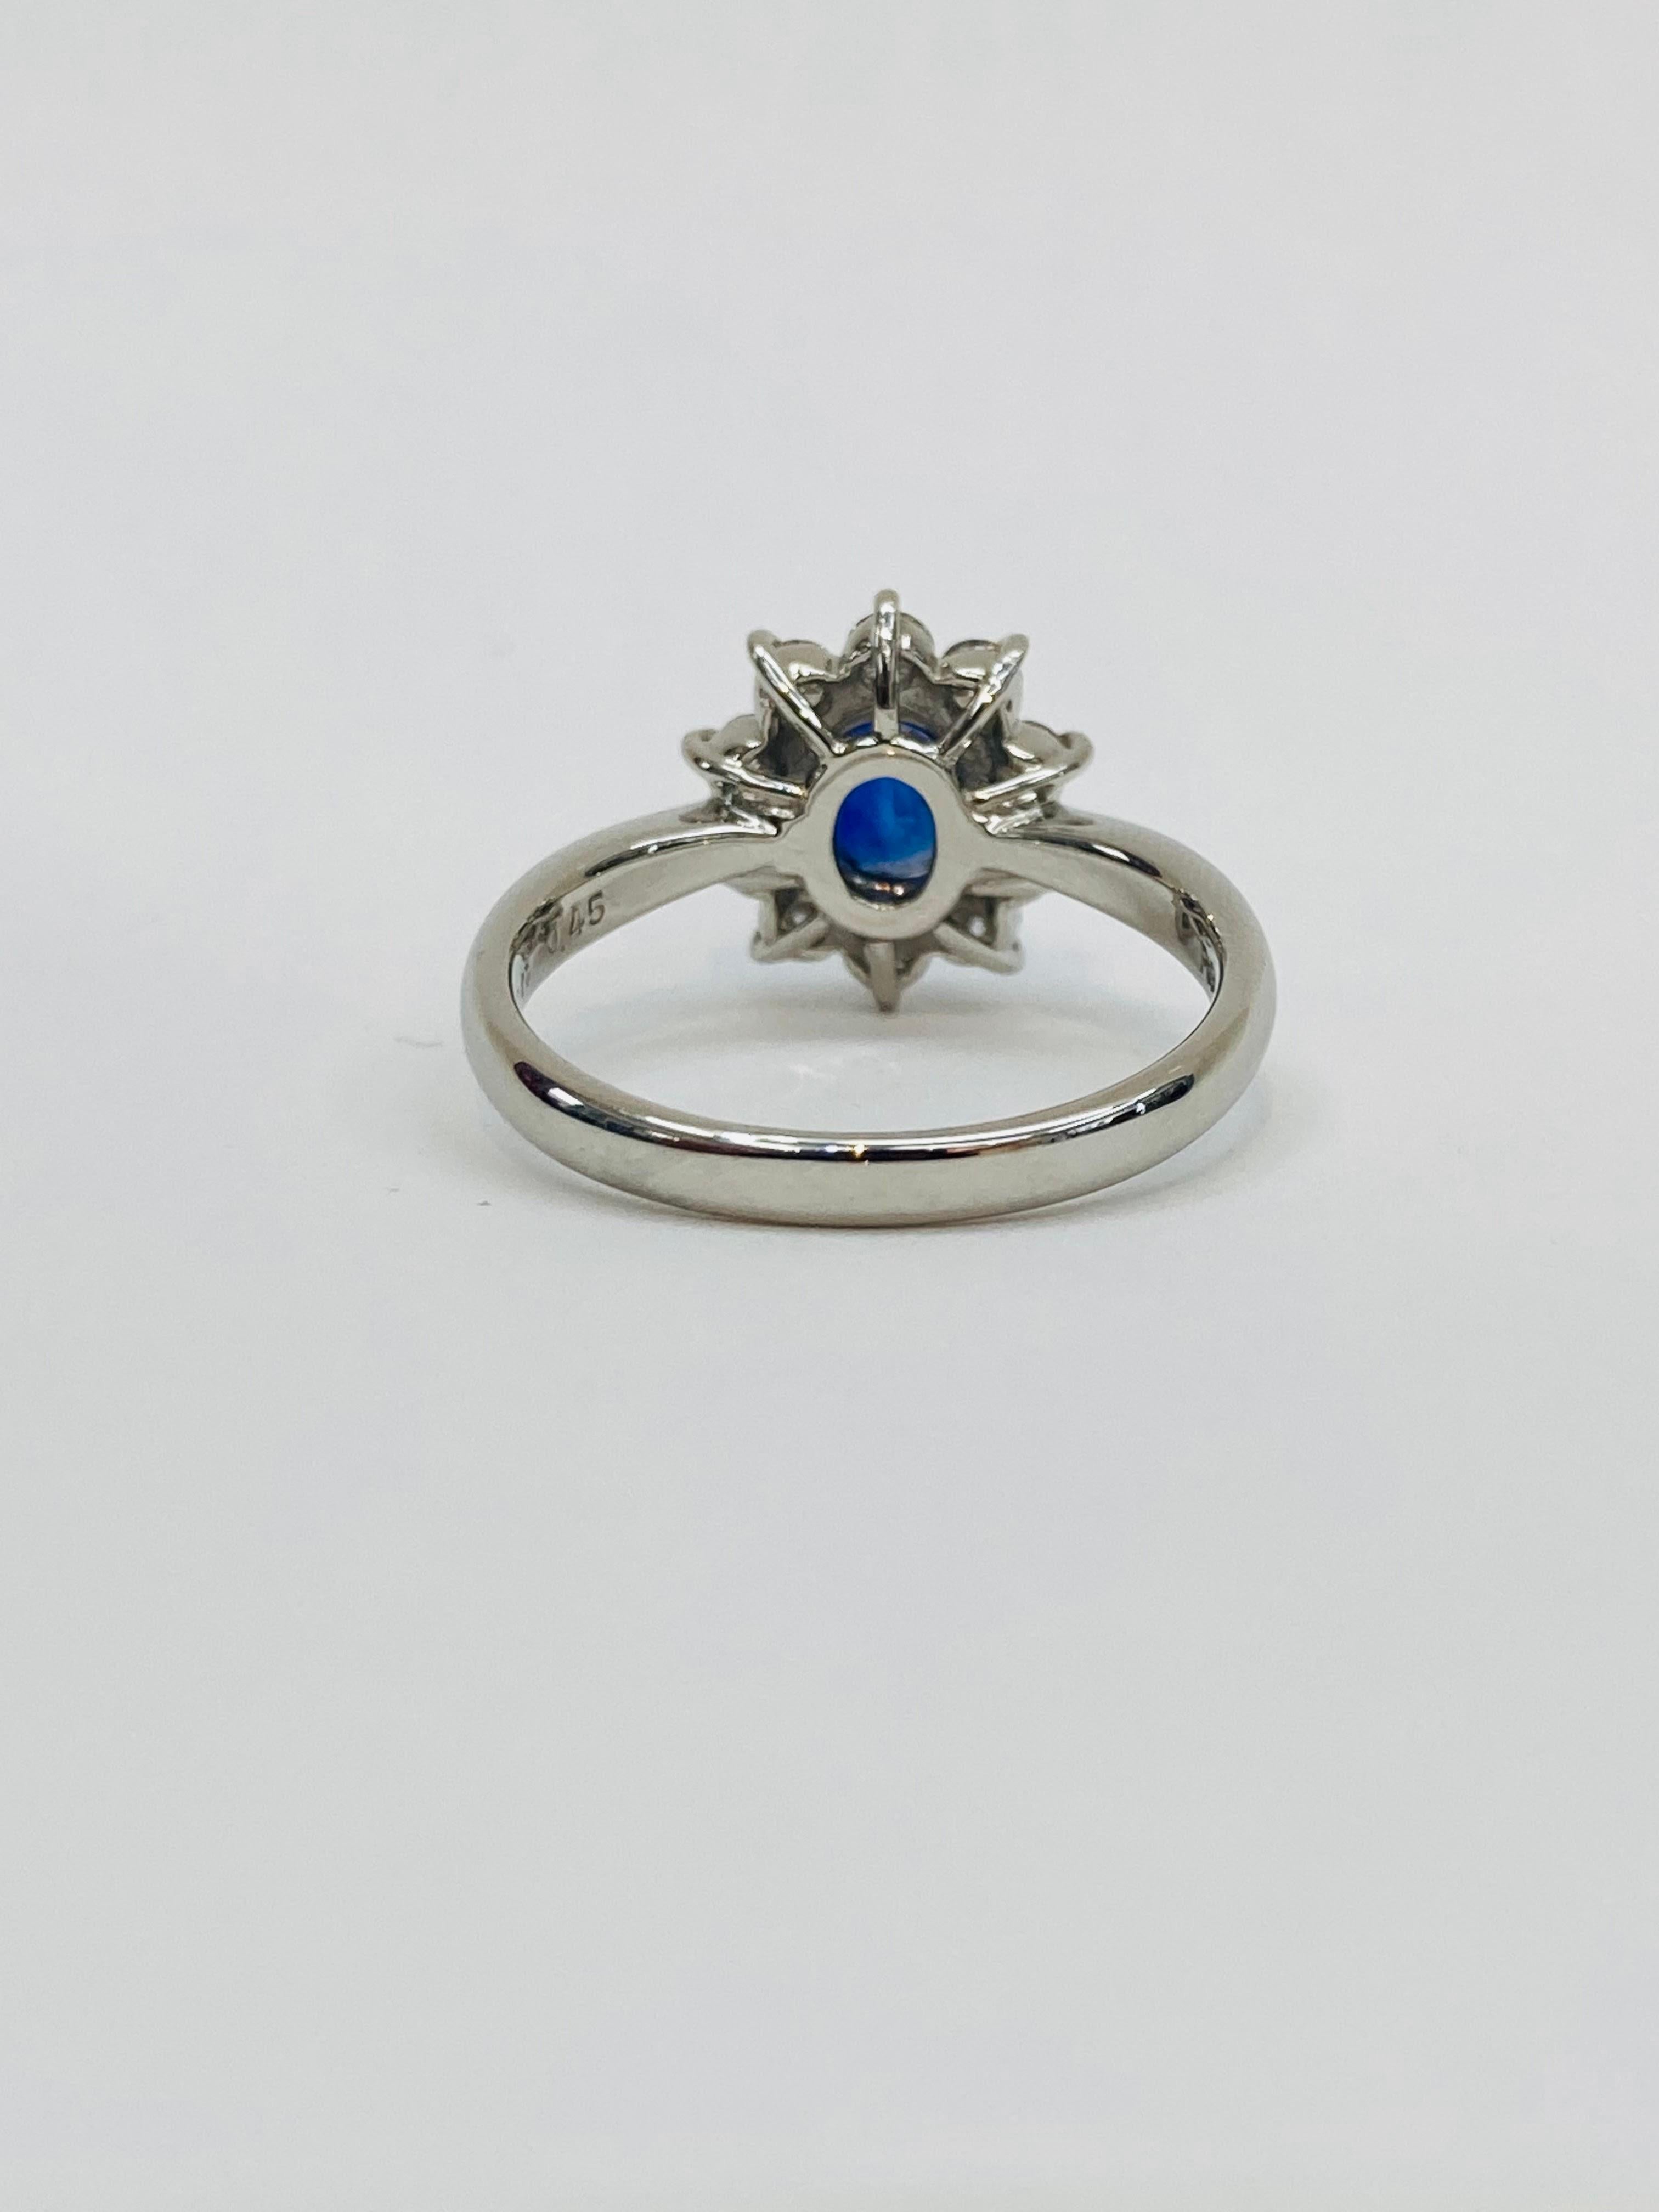 Bochic “Retro Vintage” Natural Blue Sapphire Platinum Diamond Cluster Ring

Natural Blue Sapphire 0.87 Carat 
From Sri Lanka 
Diamonds 0.45 Carat 
F color 
VS clarity 
Platinum 900
5.10 Gram

This Ring is from the 